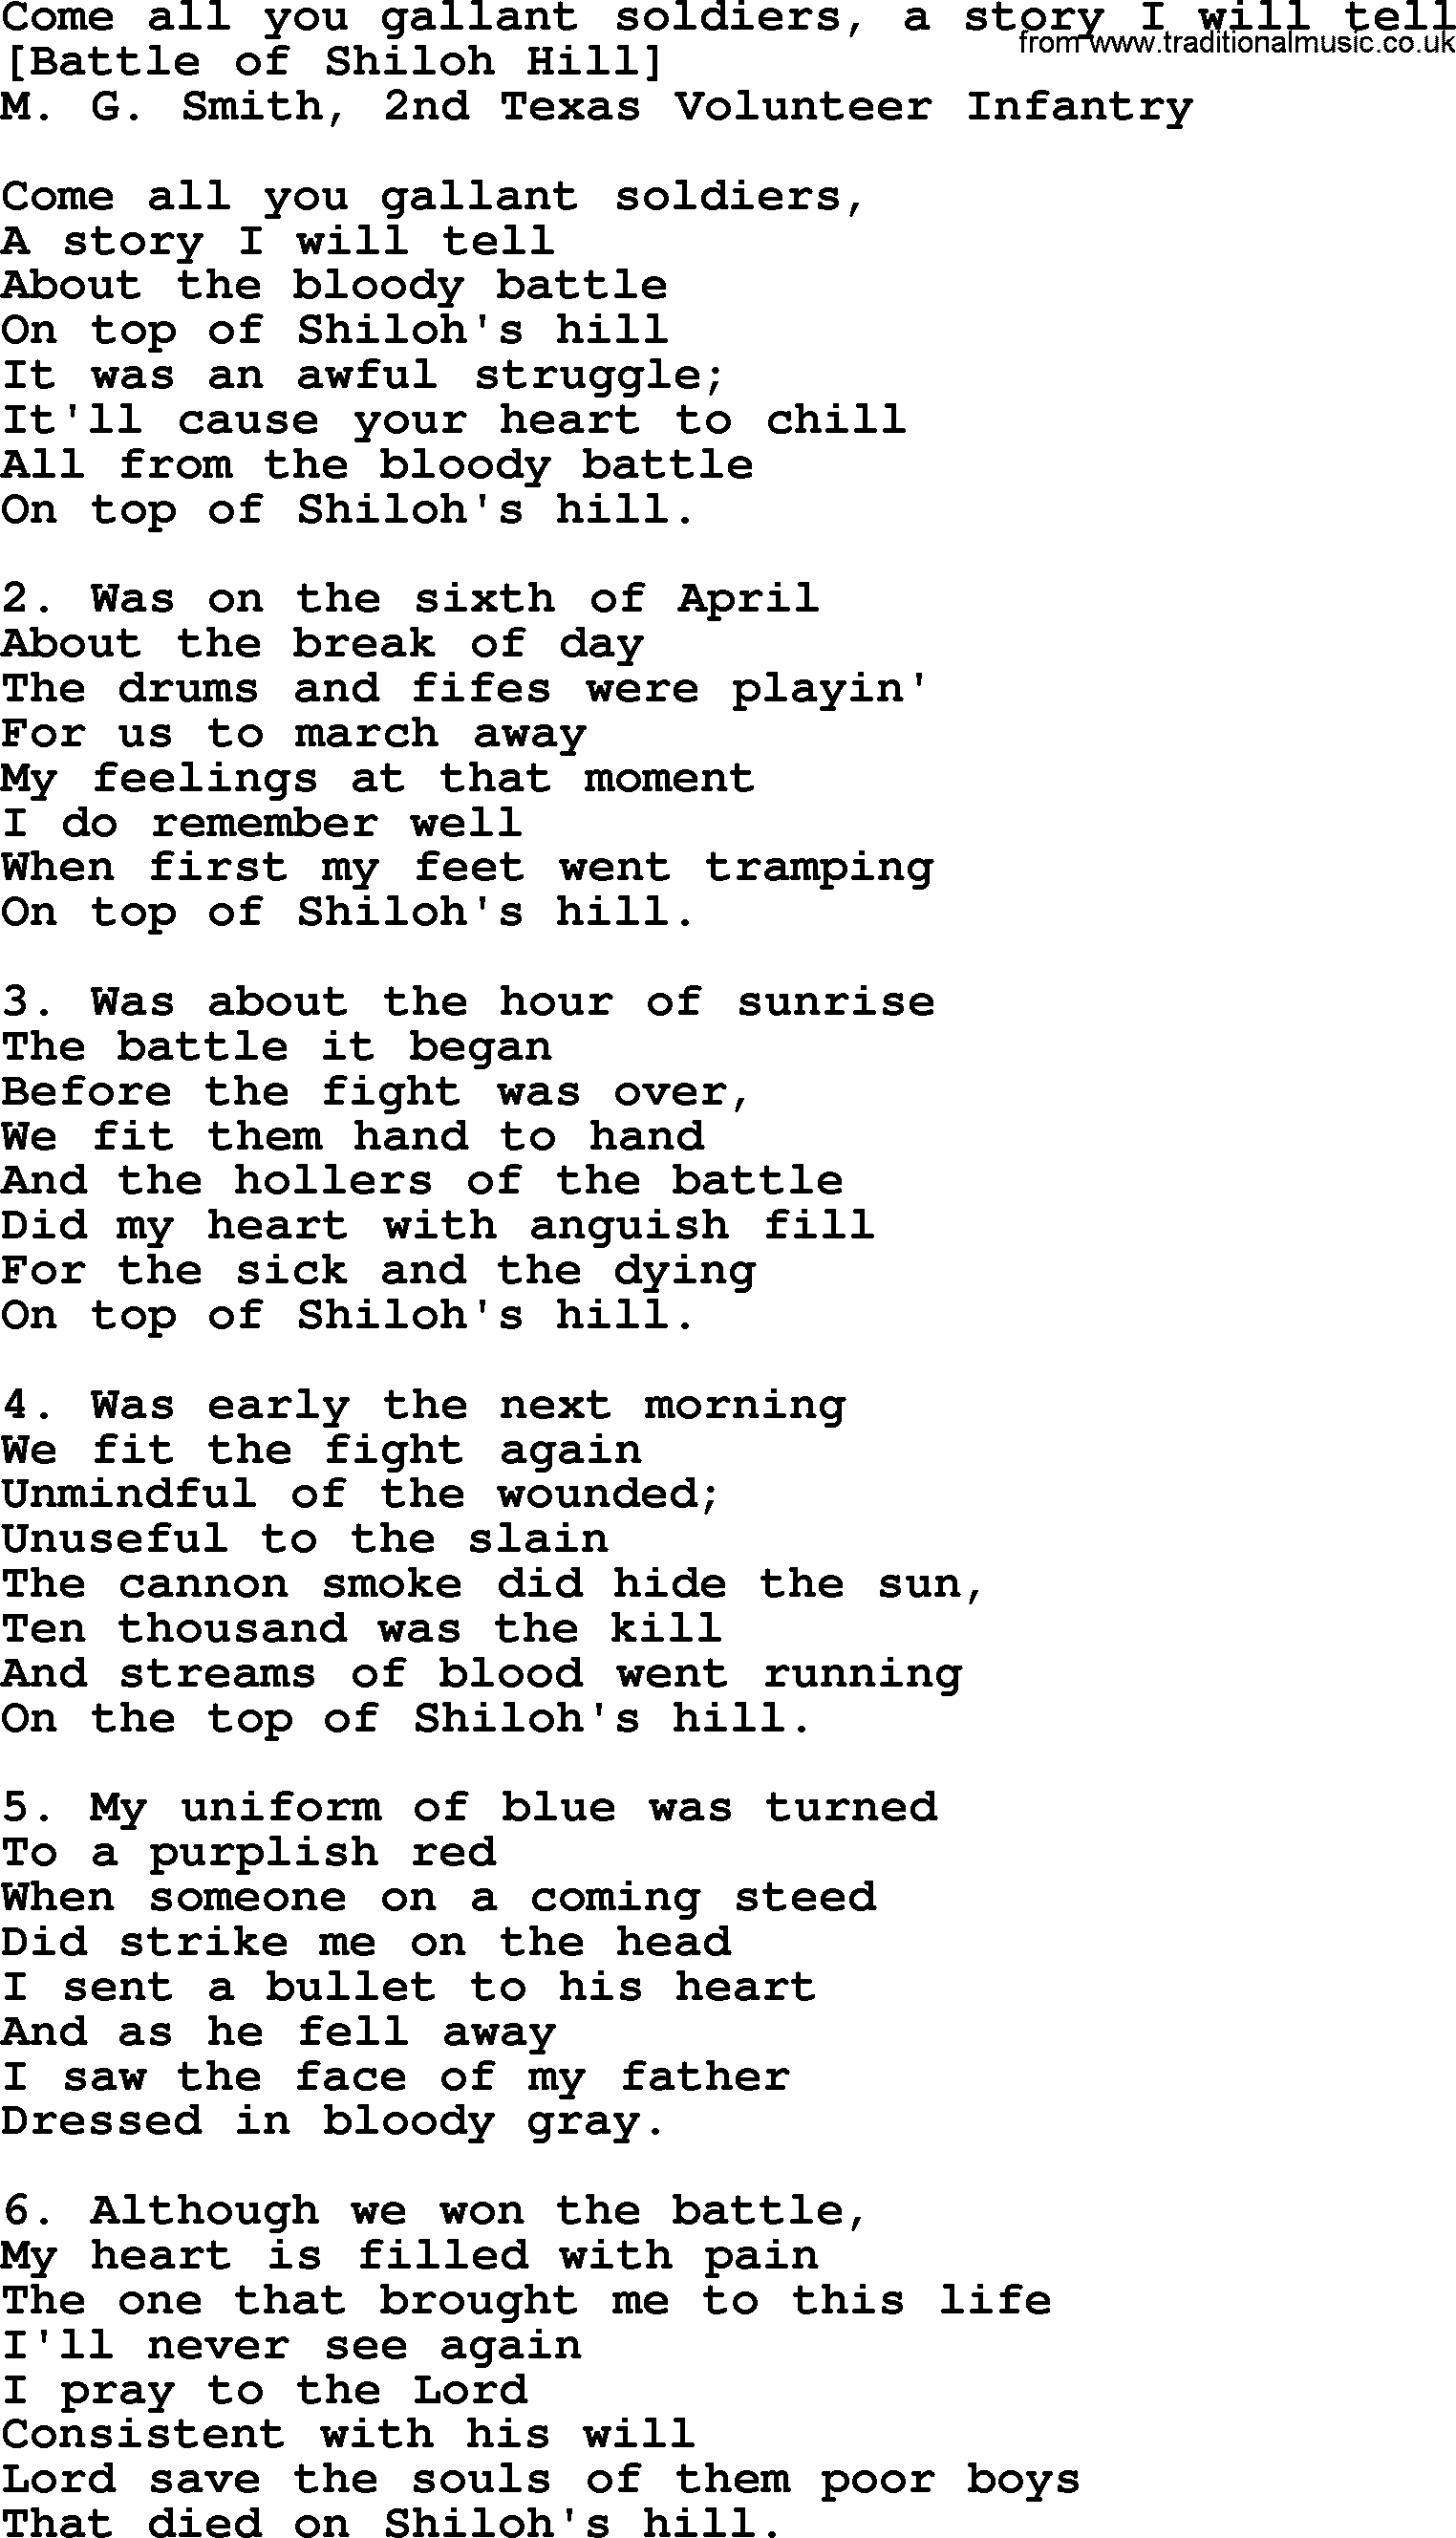 Old American Song: Come All You Gallant Soldiers, A Story I Will Tell, lyrics